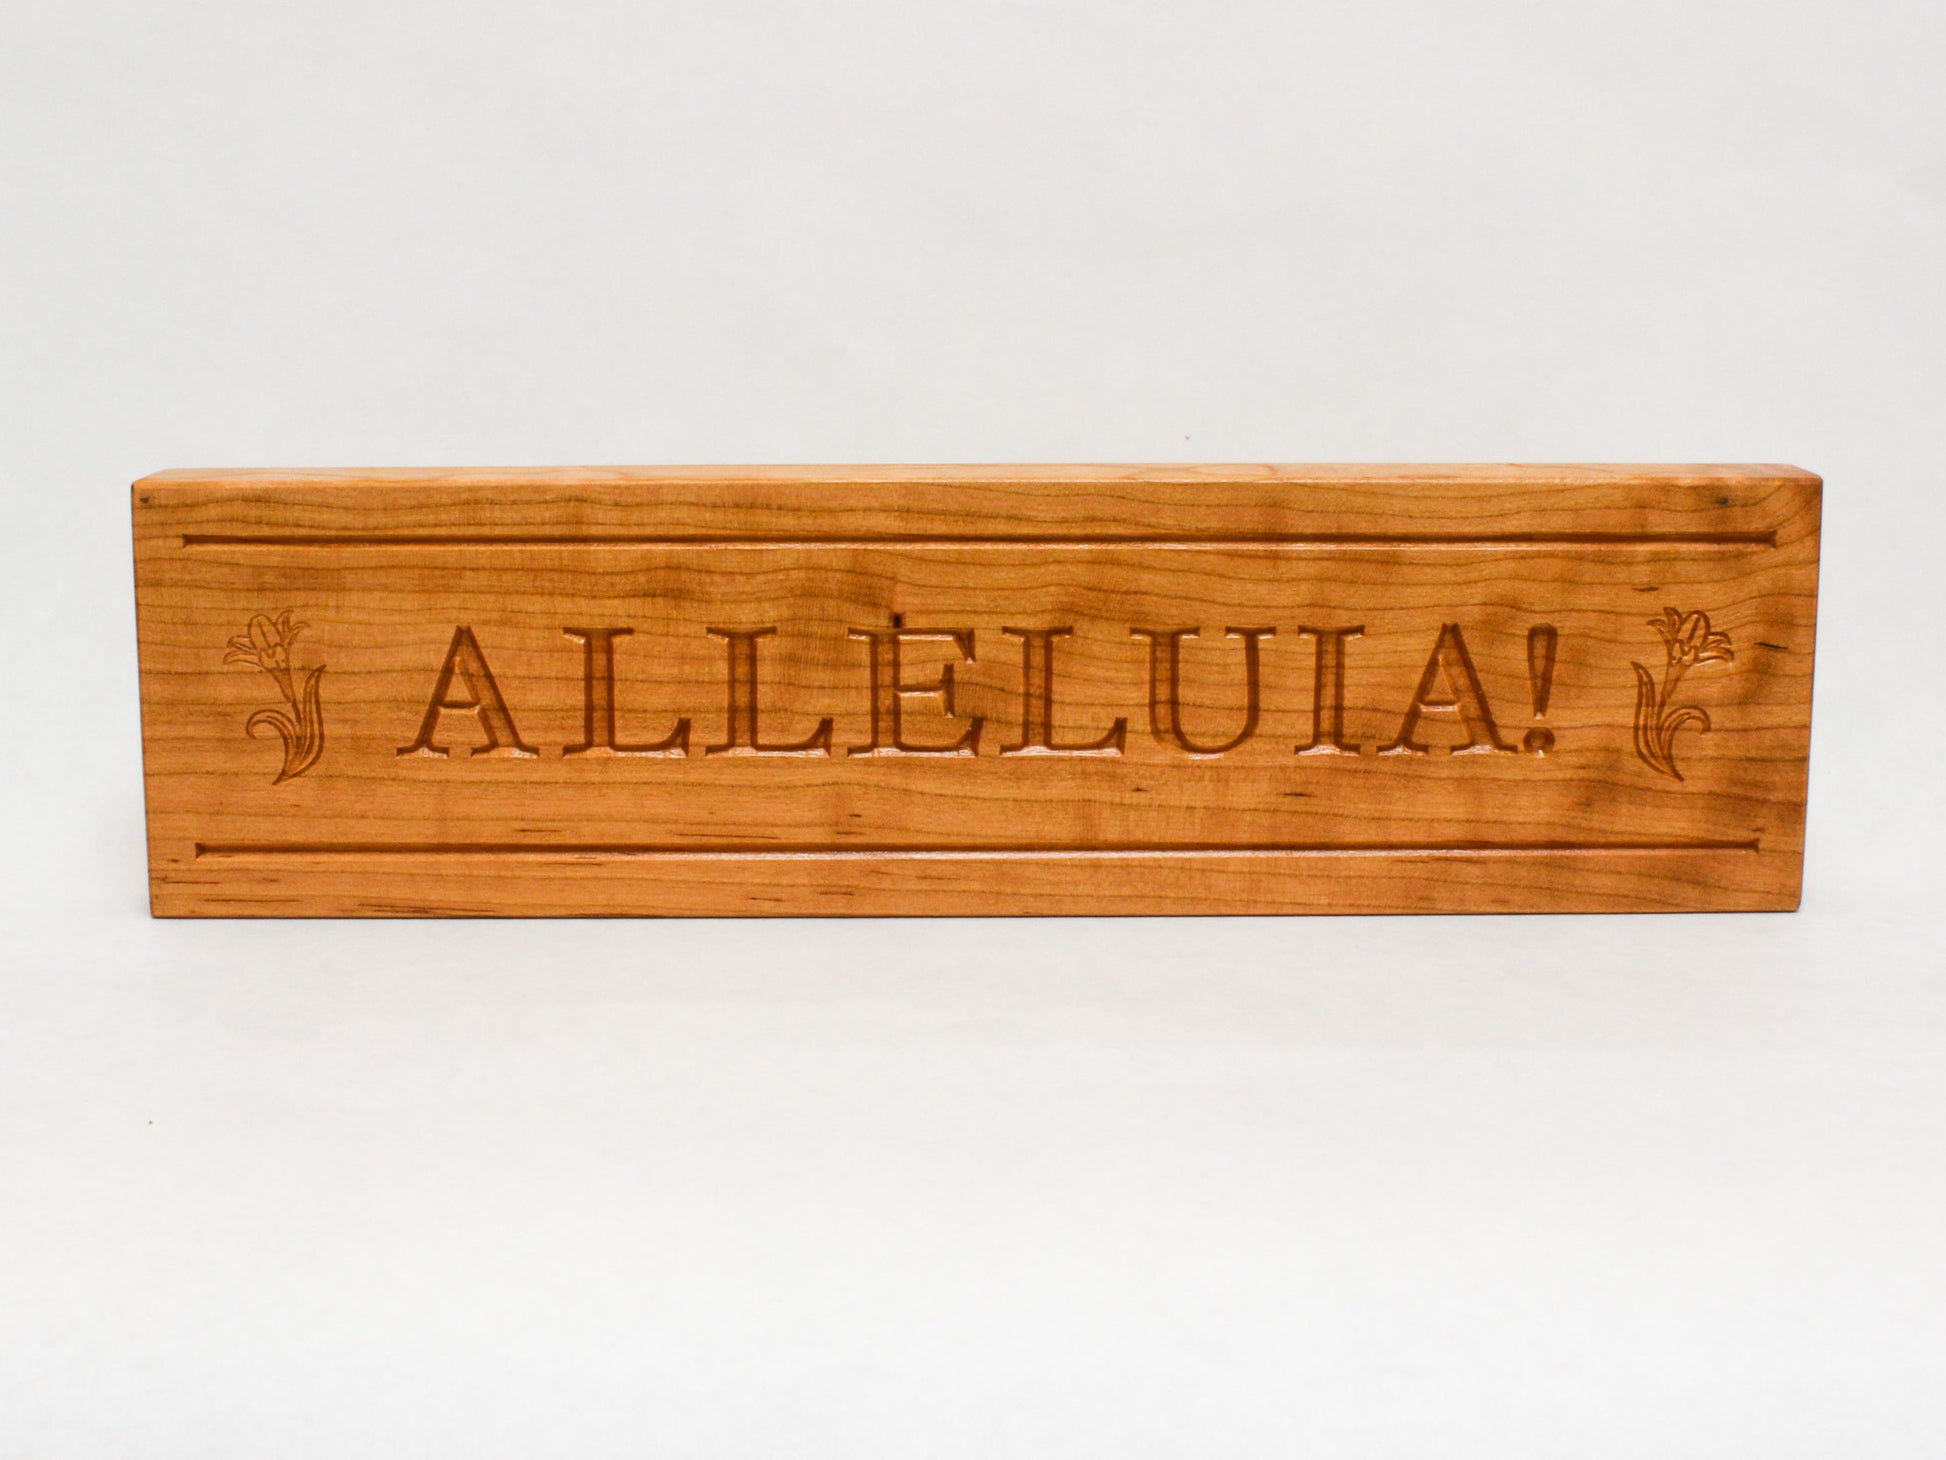 Wooden Alleluia mantle sign for Easter decoration. Freestanding wooden block engraved with Alleluia in classic text with simple Easter lily on either side.